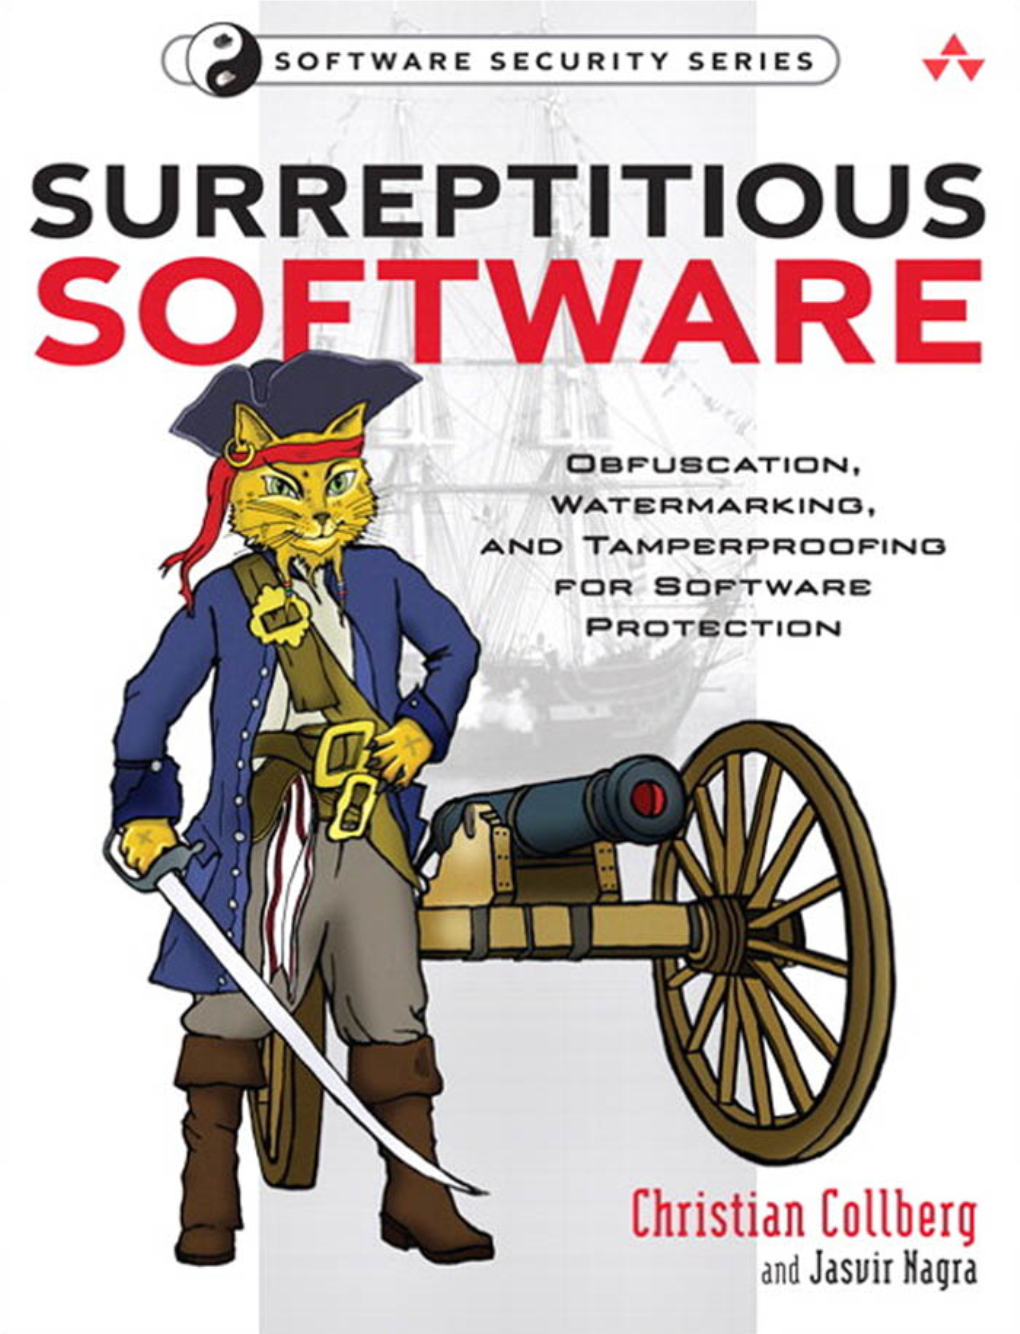 Surreptitious Software : Obfuscation, Watermarking, and Tamperprooﬁng for Software Protection / Christian Collberg, Jasvir Nagra